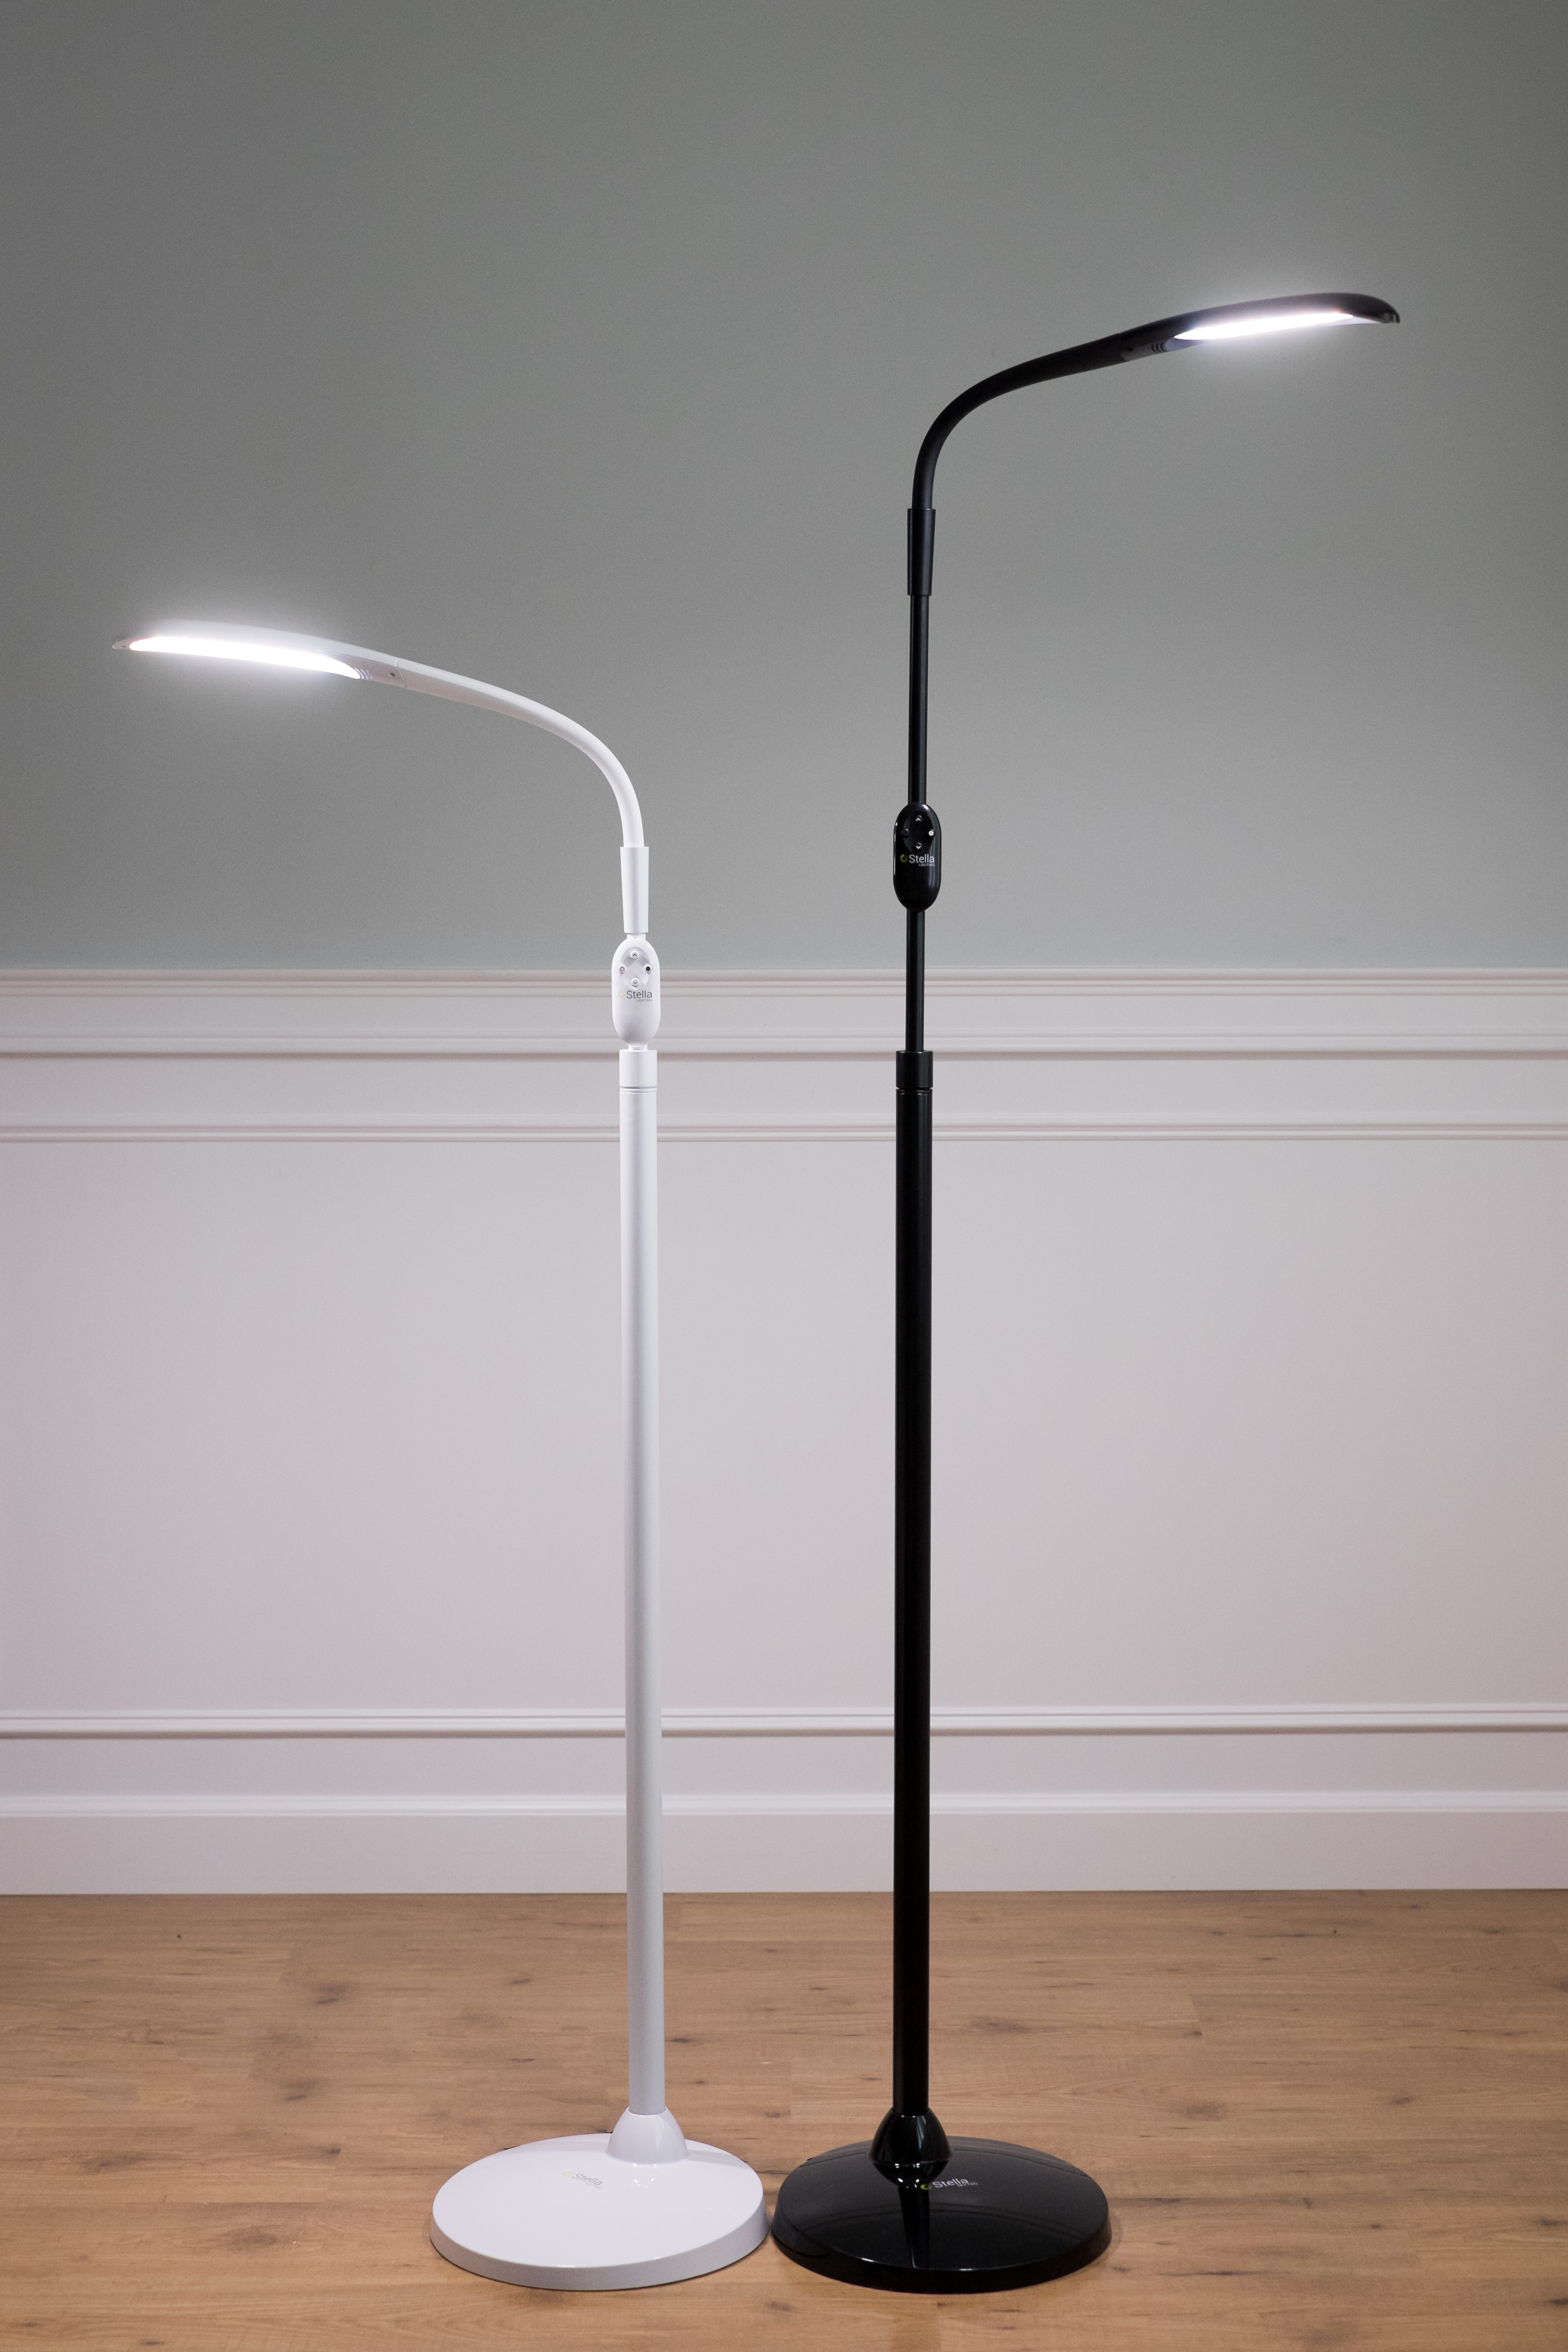 Stellasky Two Led Floor Lamp Your Low Vision Lighting Solution throughout size 3155 X 4732